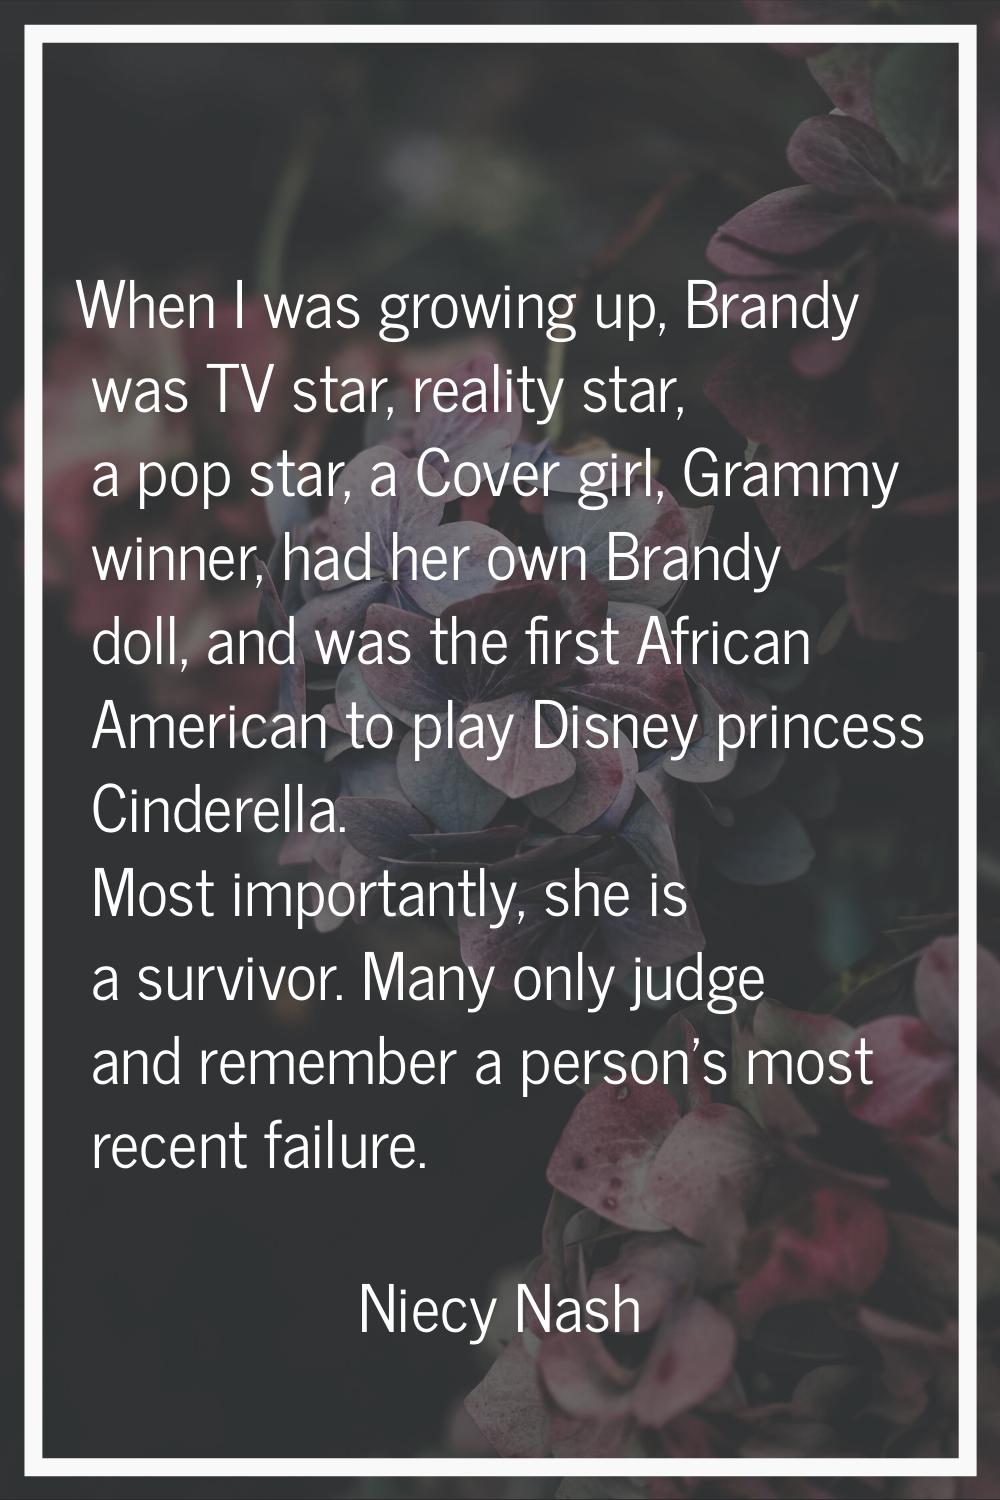 When I was growing up, Brandy was TV star, reality star, a pop star, a Cover girl, Grammy winner, h